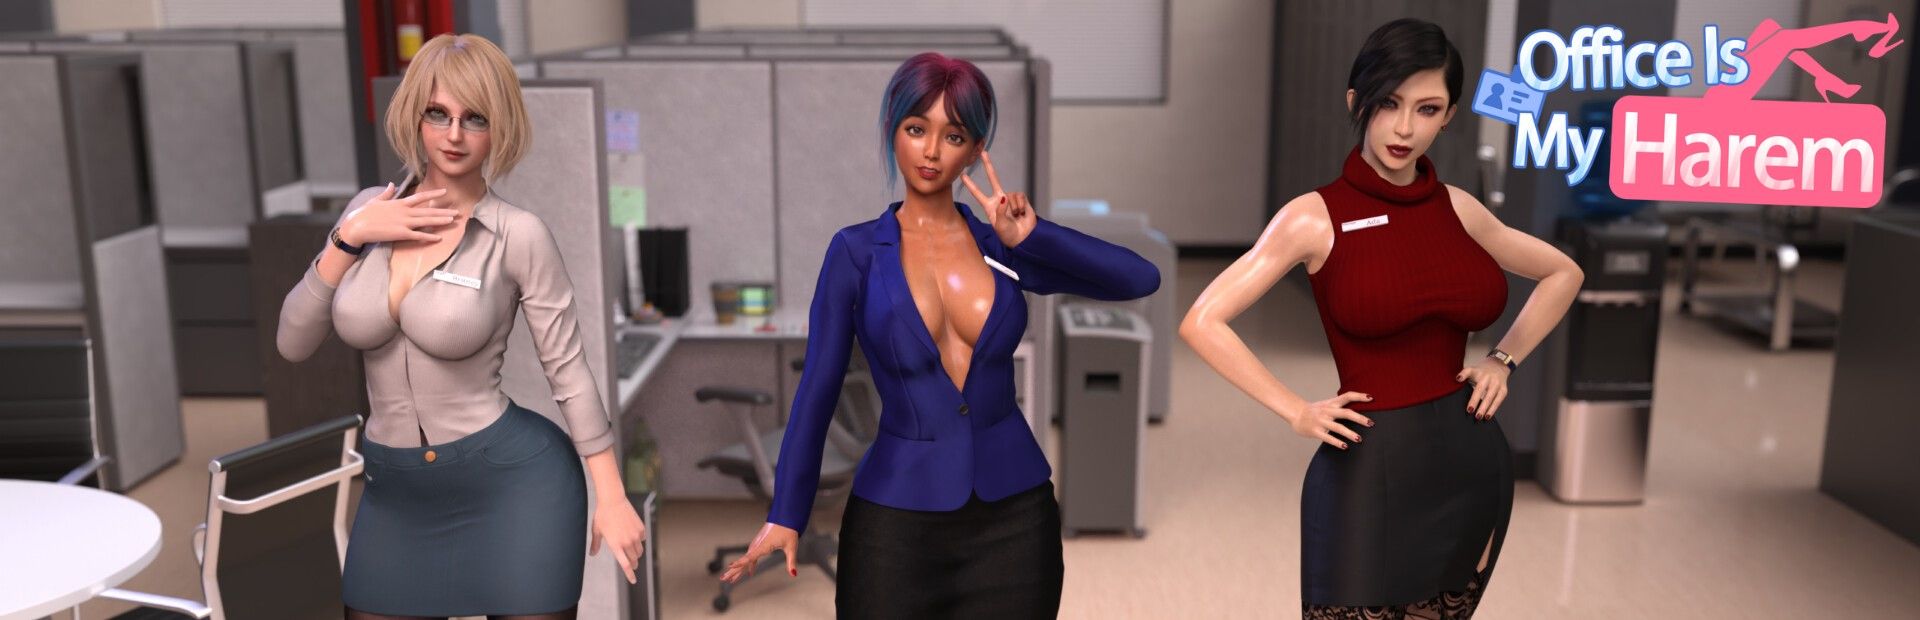 Office Is My Harem [DuaWolf] Adult xxx Game Download